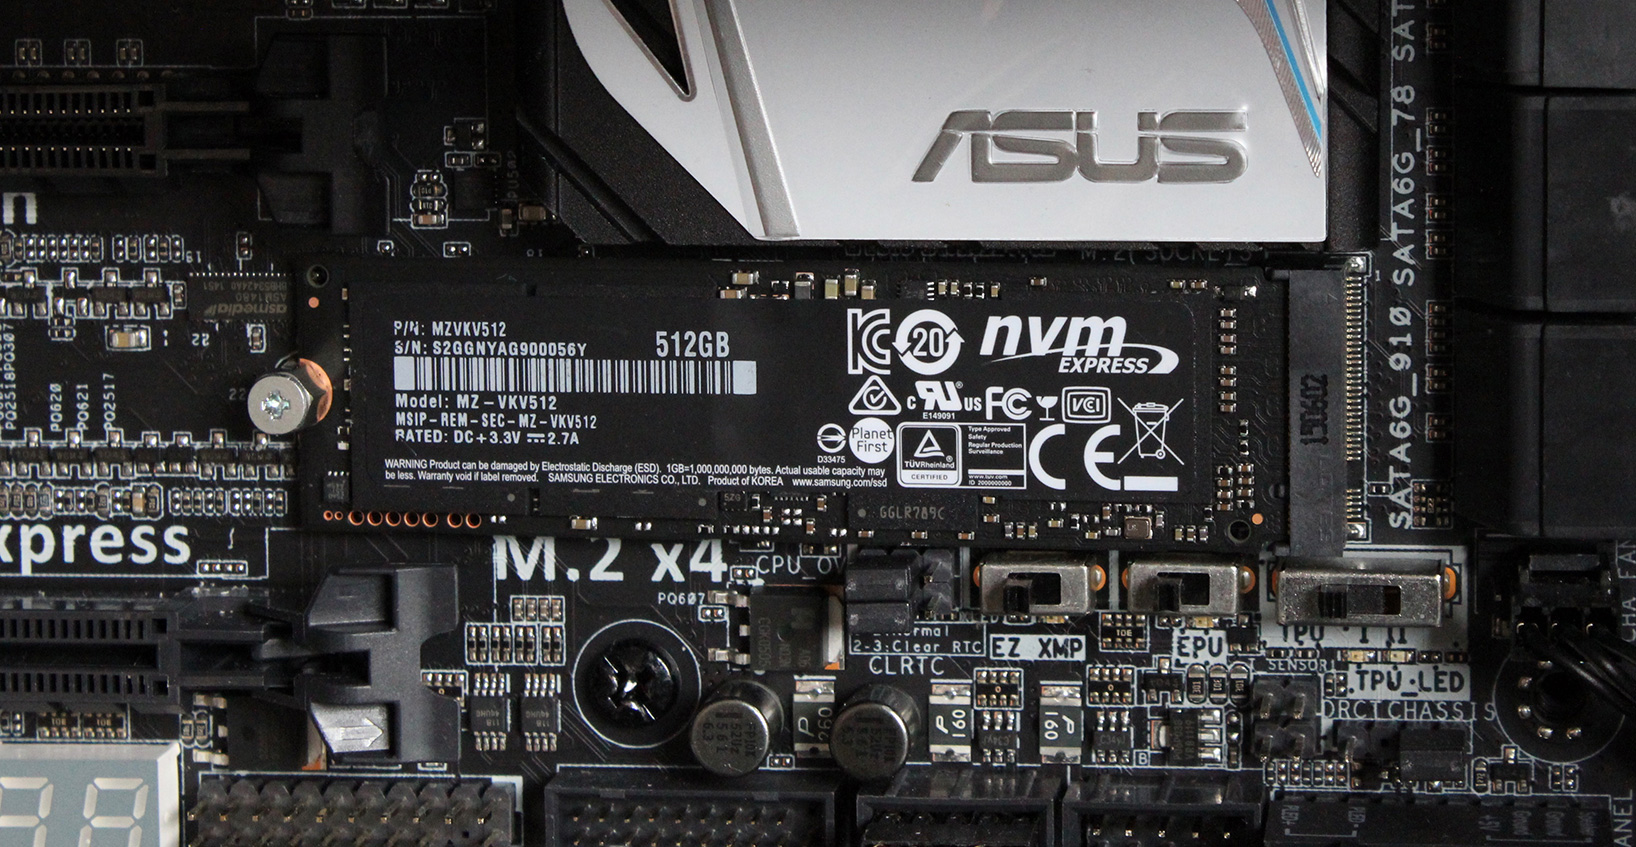 partij Nieuwe aankomst helling 950 Pro review: Samsung's first PCIe M.2 NVMe SSD is an absolute monster |  Ars Technica